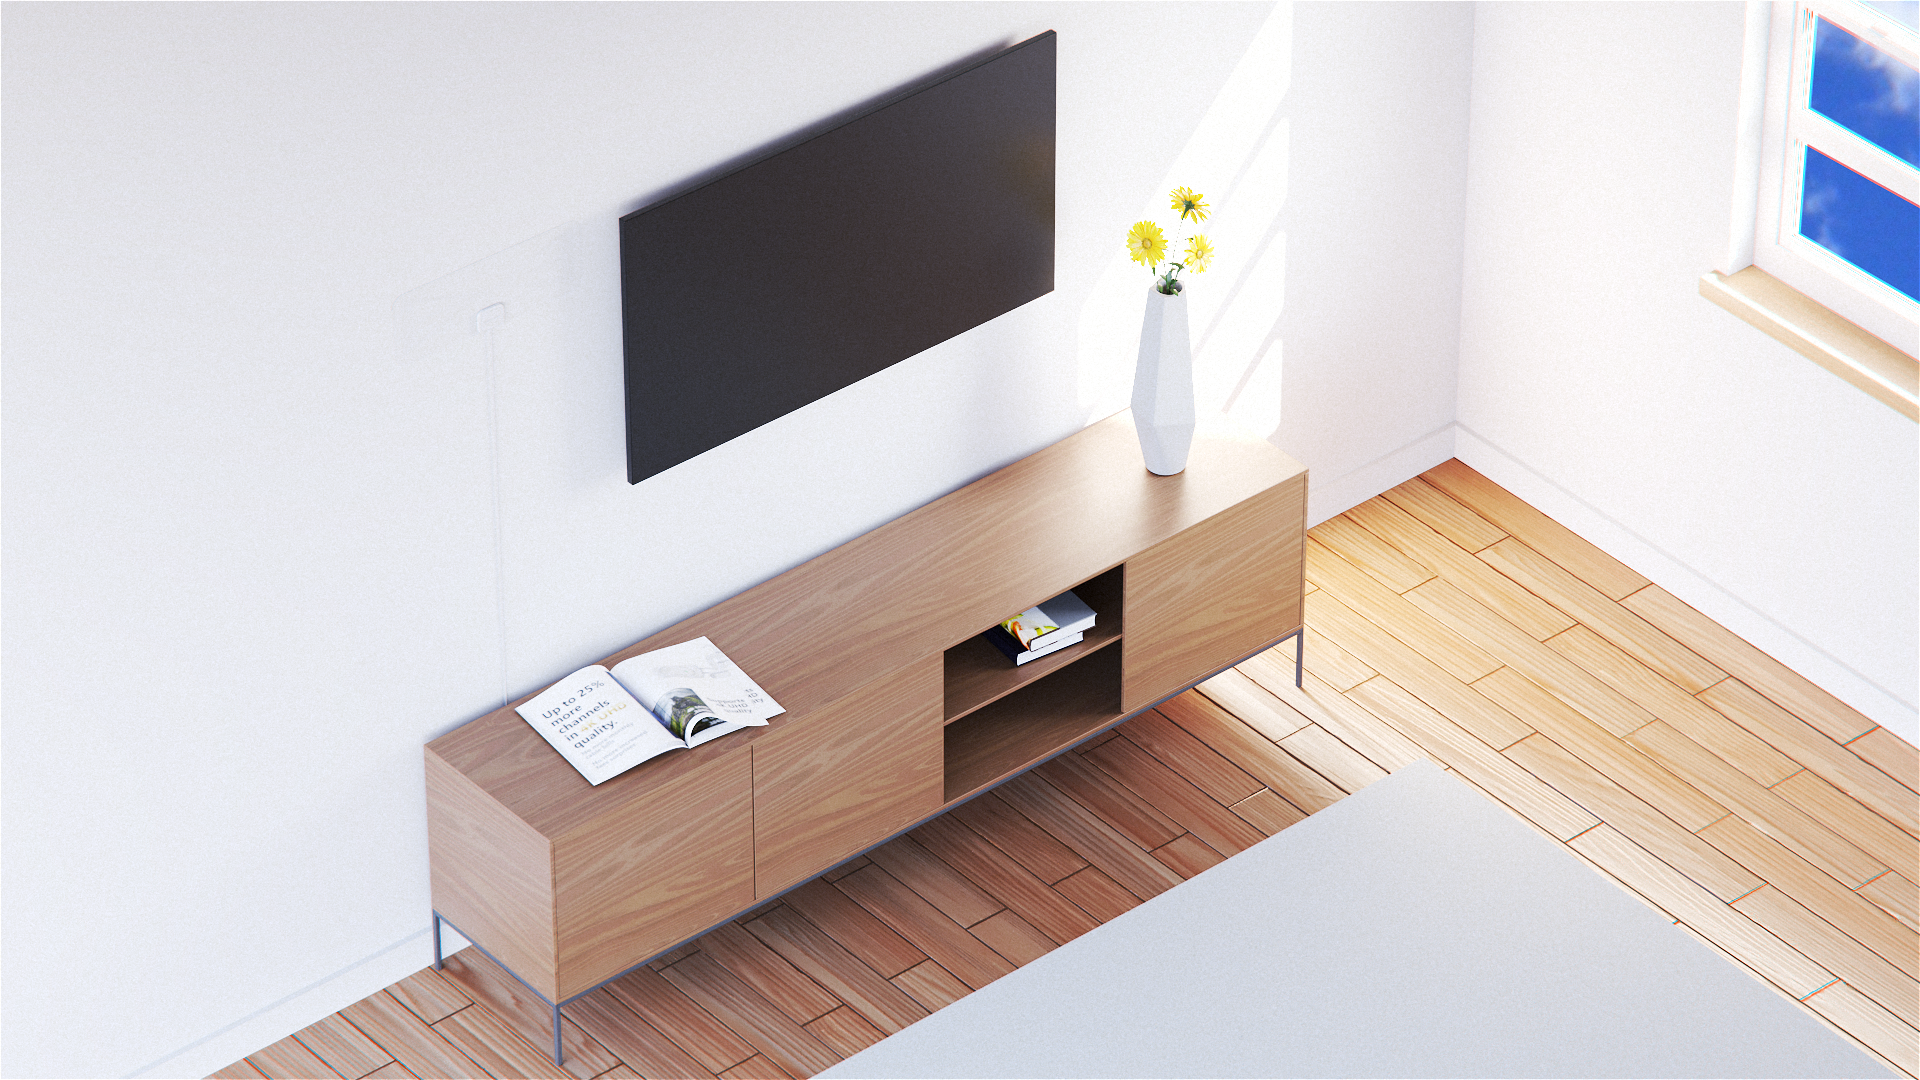 b. ULTRA•VIZION can be placed directly on your Wall above your TV.